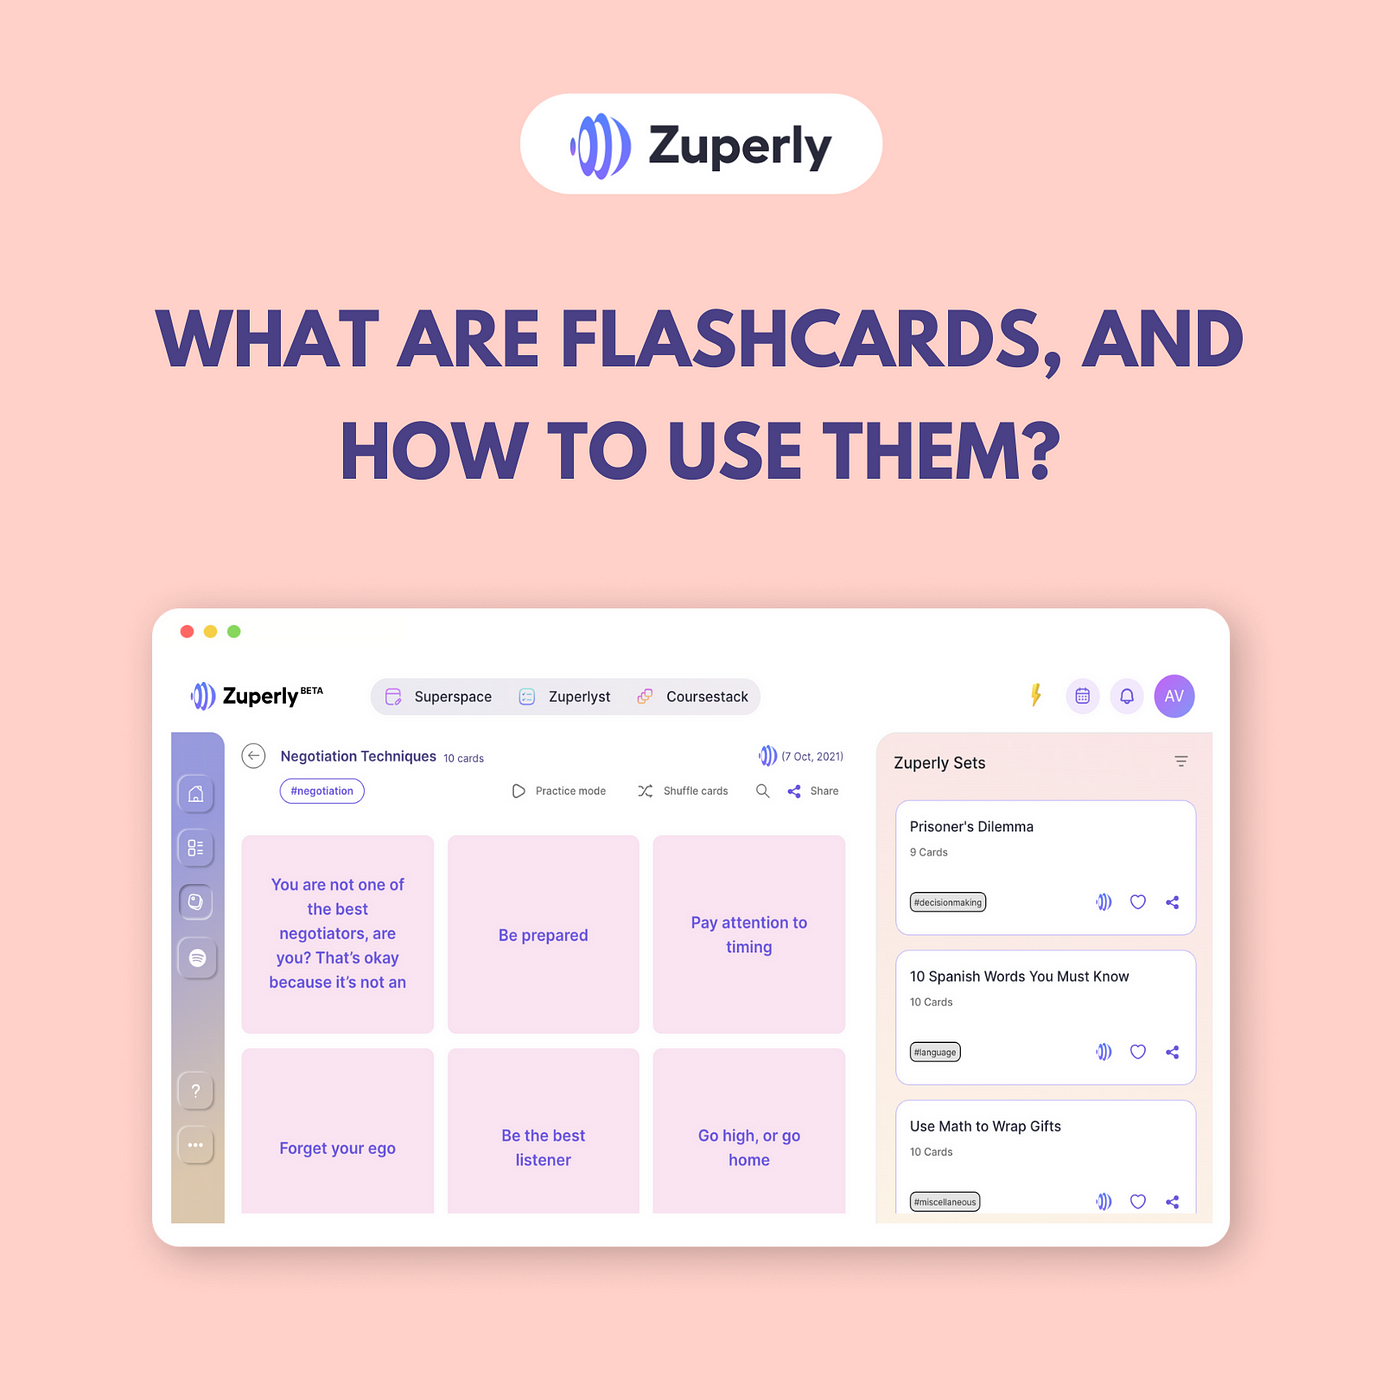 What are Flashcards, and how to use them?